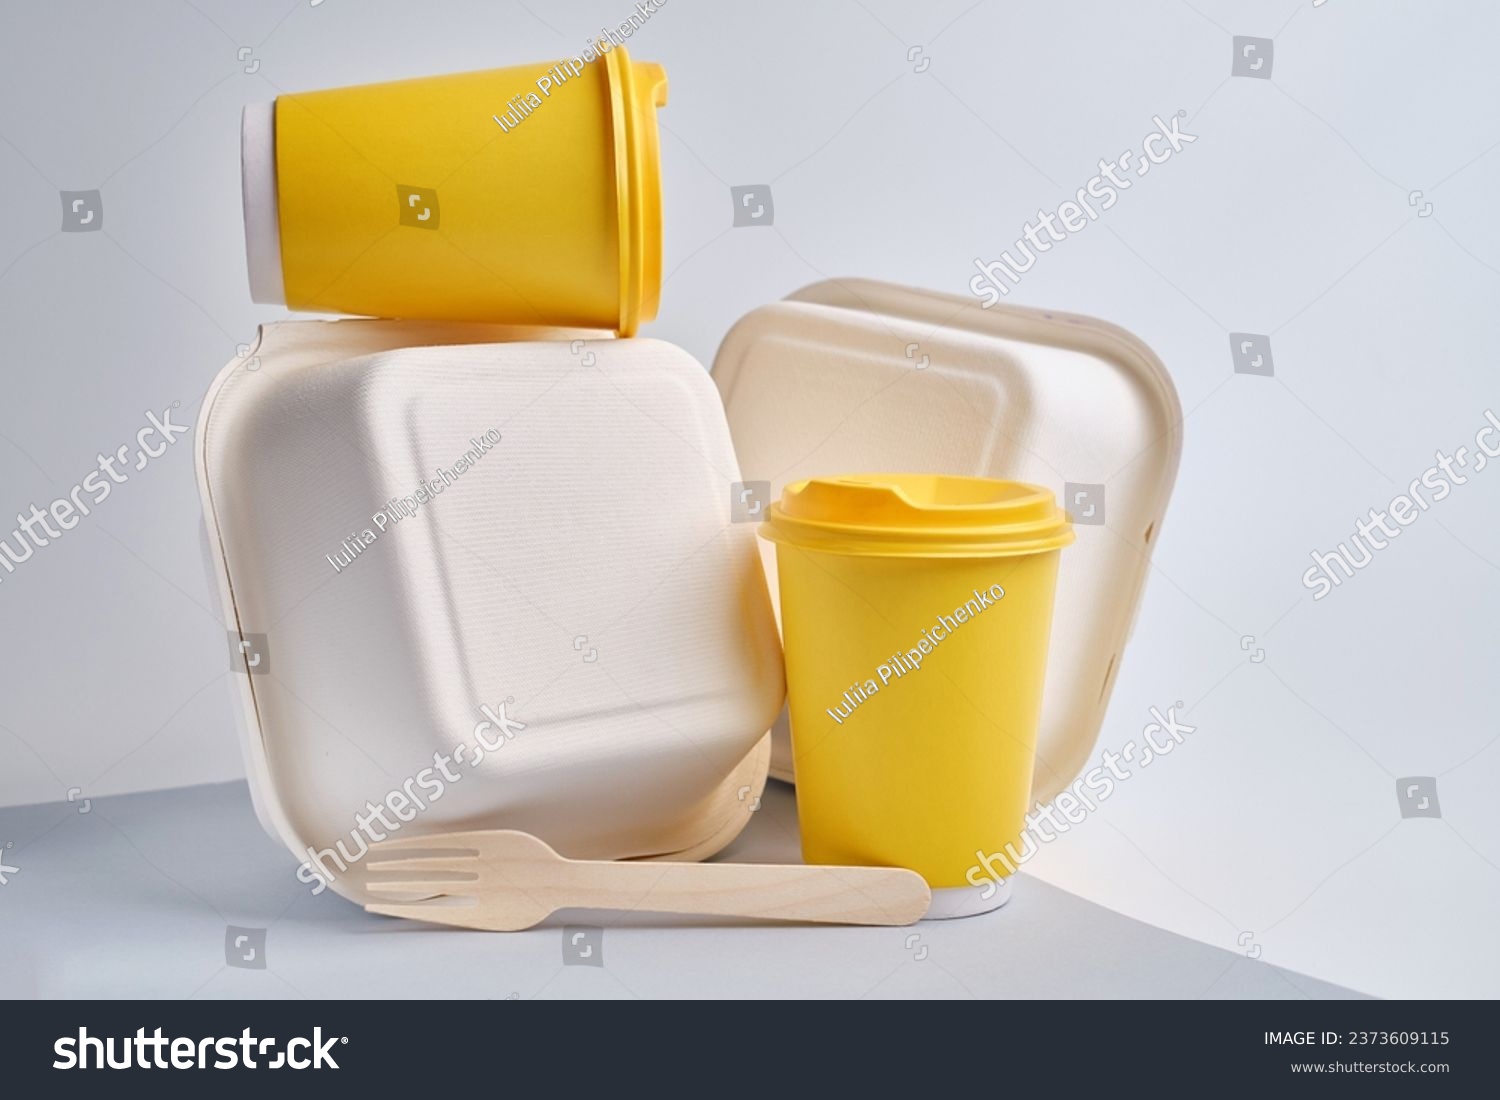 Kraft paper tableware: cups, food boxes, wooden forks isolated on a light background. A set of various disposable tableware. Recycling and zero waste concept. Mock up  #2373609115